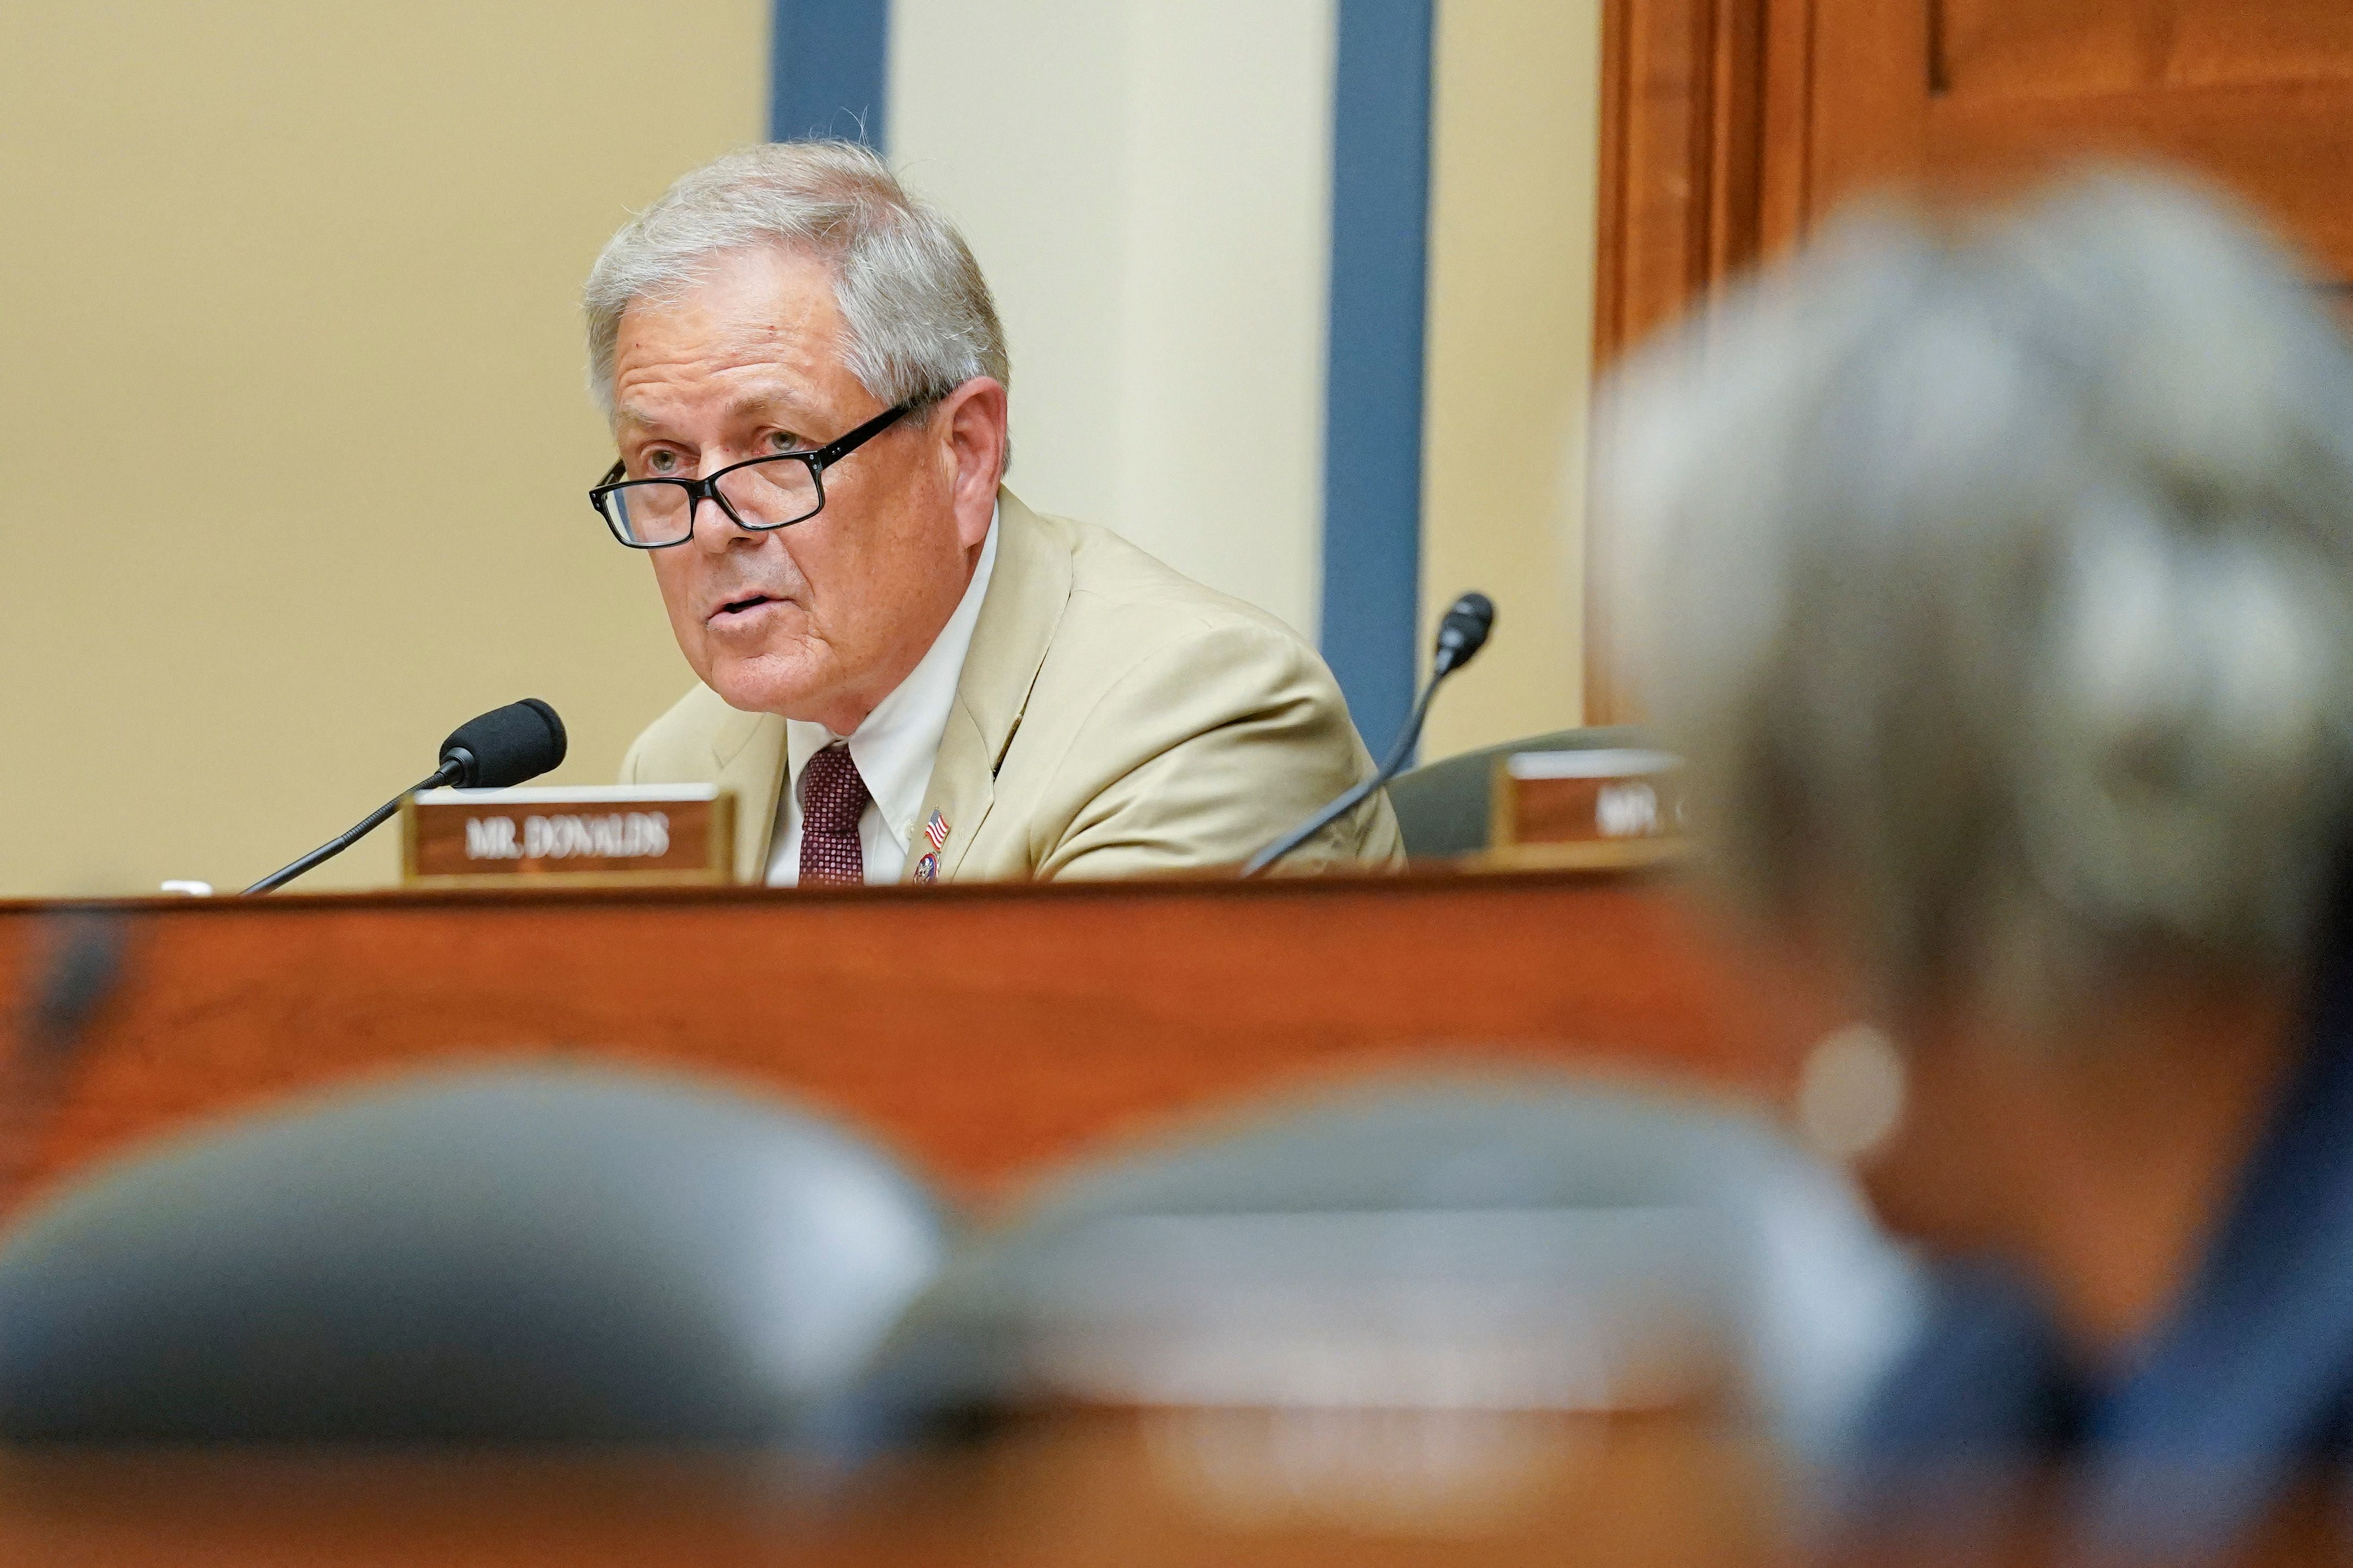 US Representative Ralph Norman (R-SC) speaks during a House Committee on Oversight and Reform hearing on gun violence on Capitol Hill in Washington, DC, on June 8, 2022